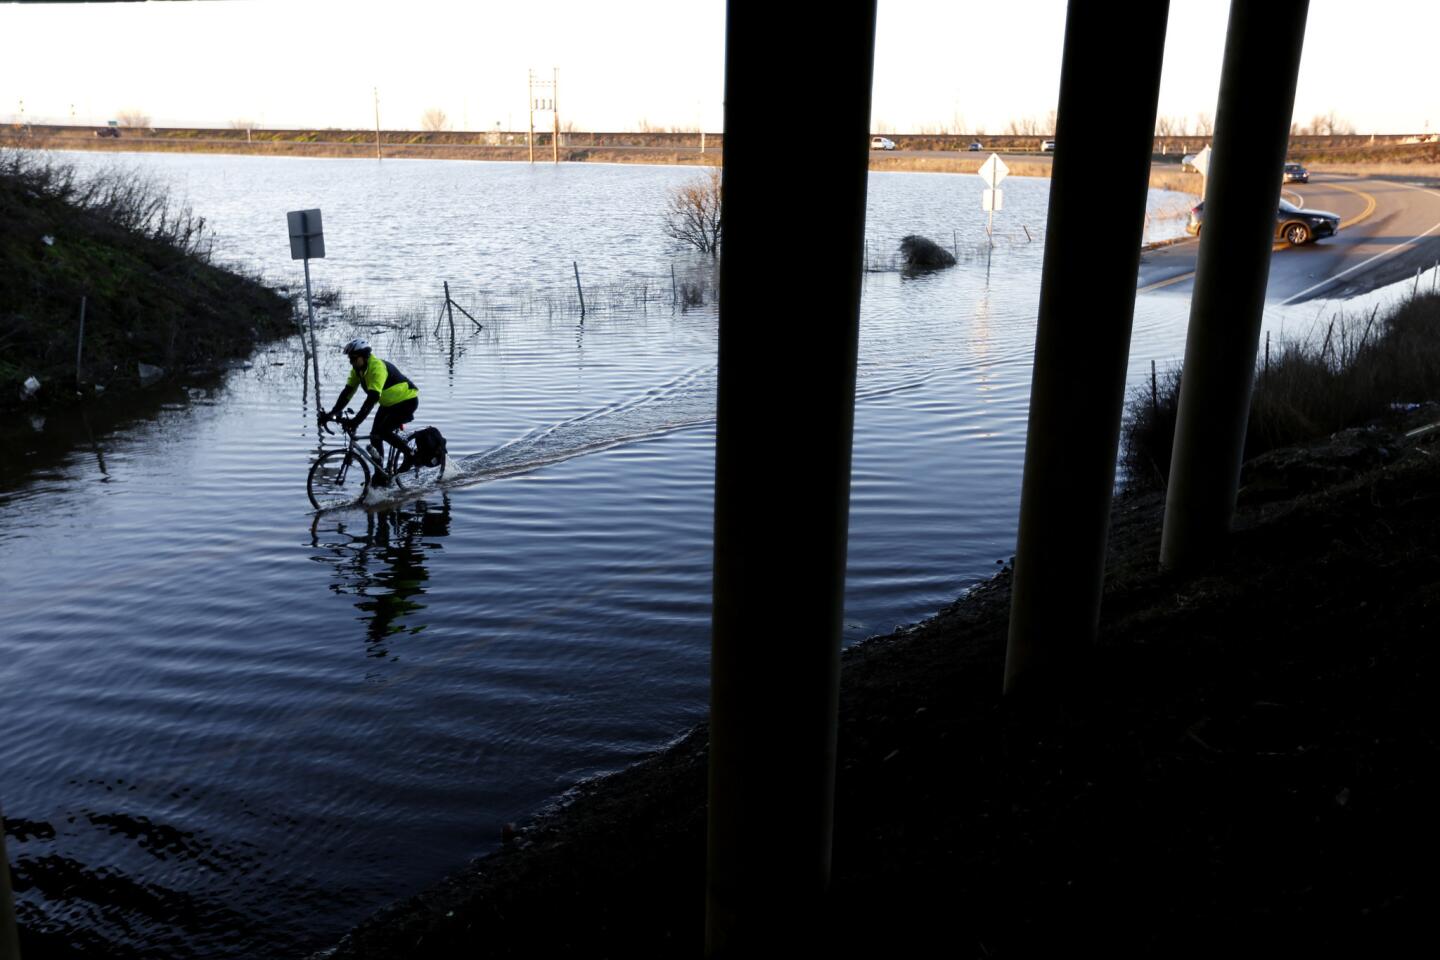 A bicyclist makes his way through East Chiles Road, which remains flooded at the underpass to Interstate 80 in the Yolo Bypass area, west of Sacramento.